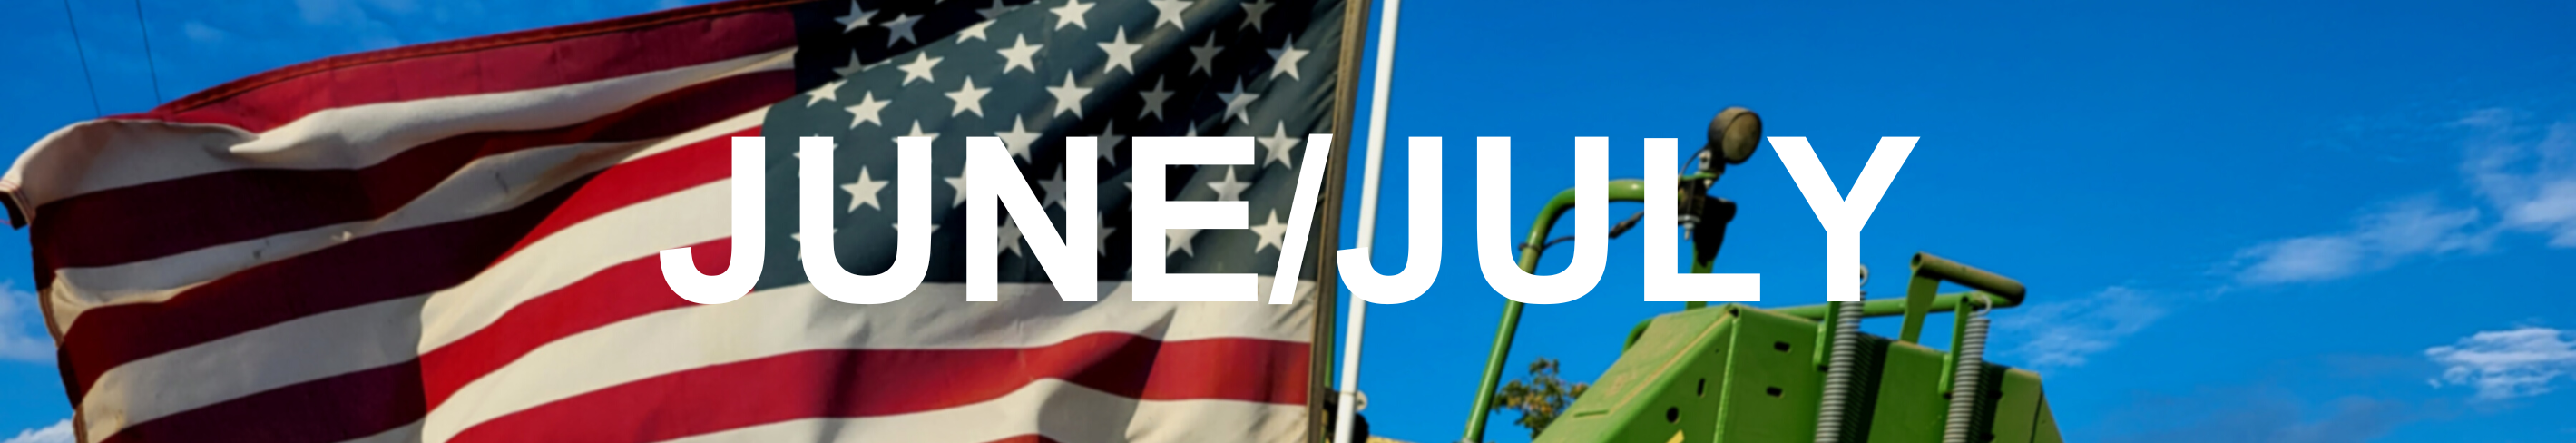 June/July Newsletter, We Grow Union County NC 